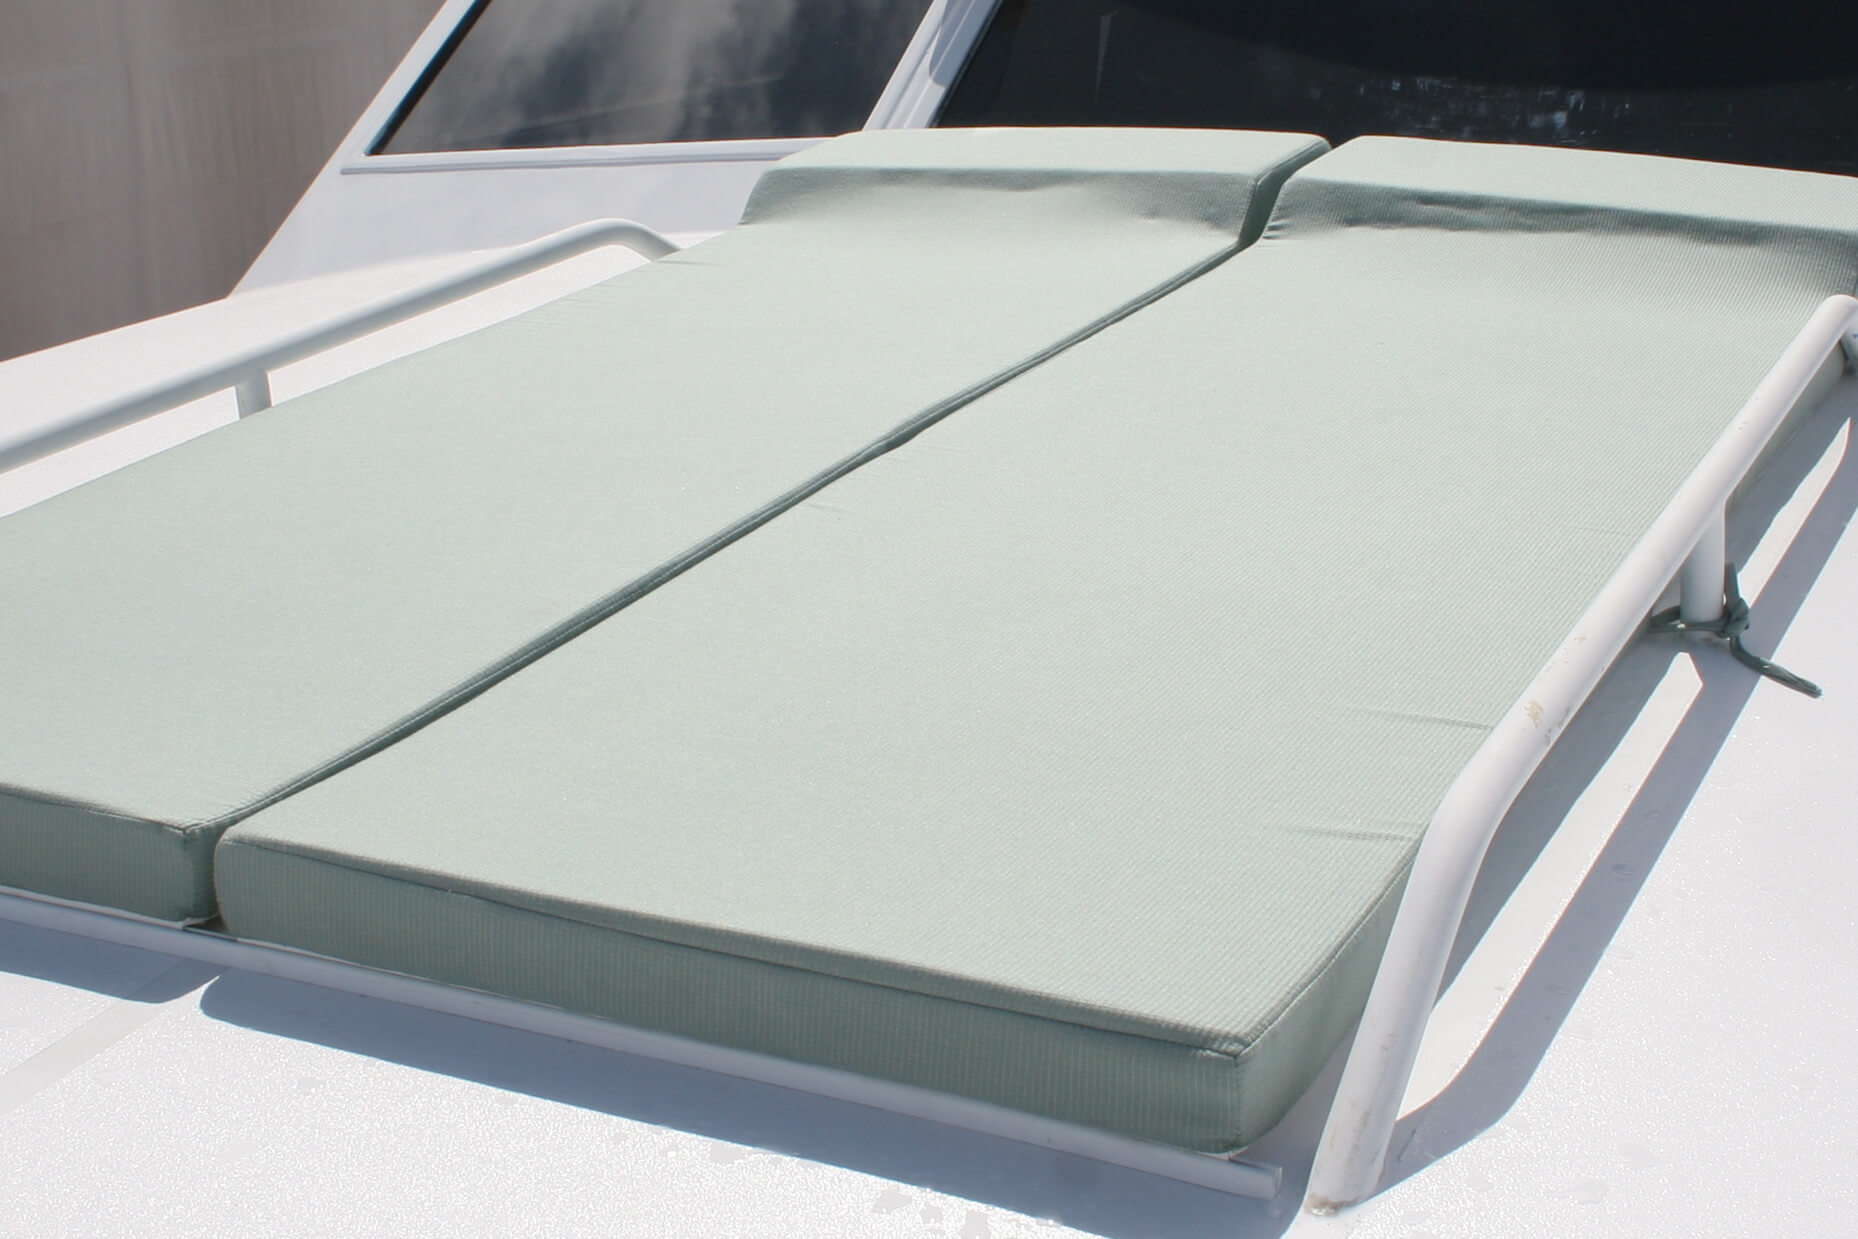 Sunpads covered in Sunbrella fabrics offer a place to enjoy the sun on a boat deck